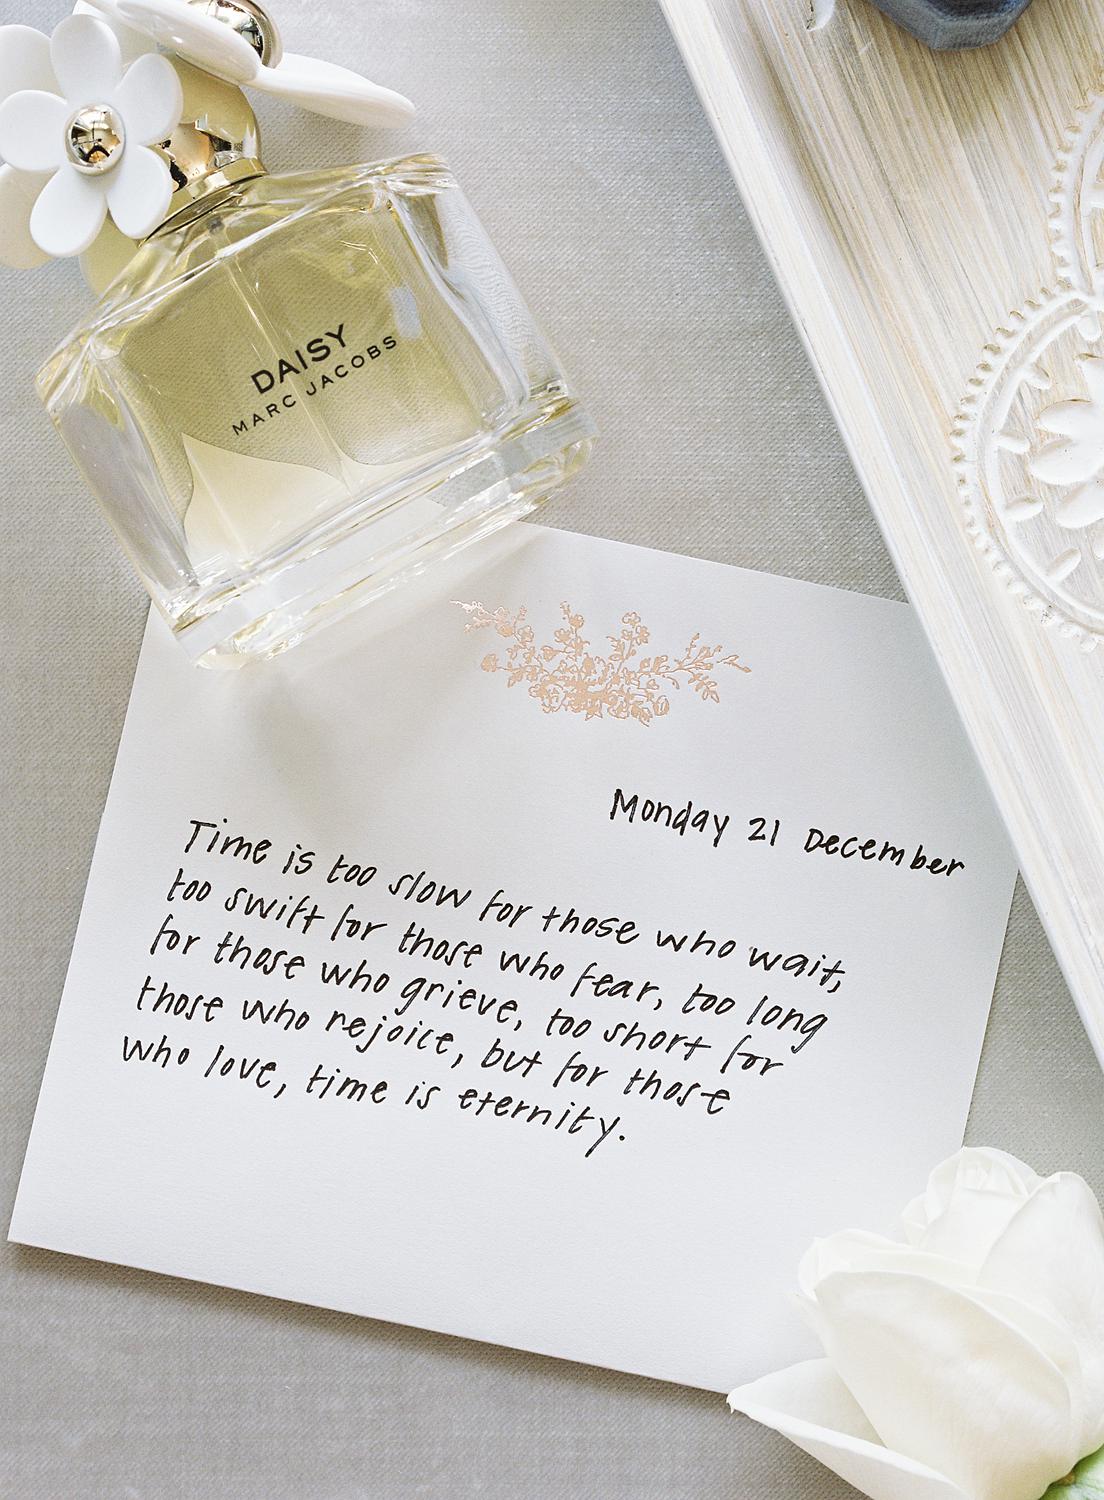 Hand written letter for the groom on the wedding day